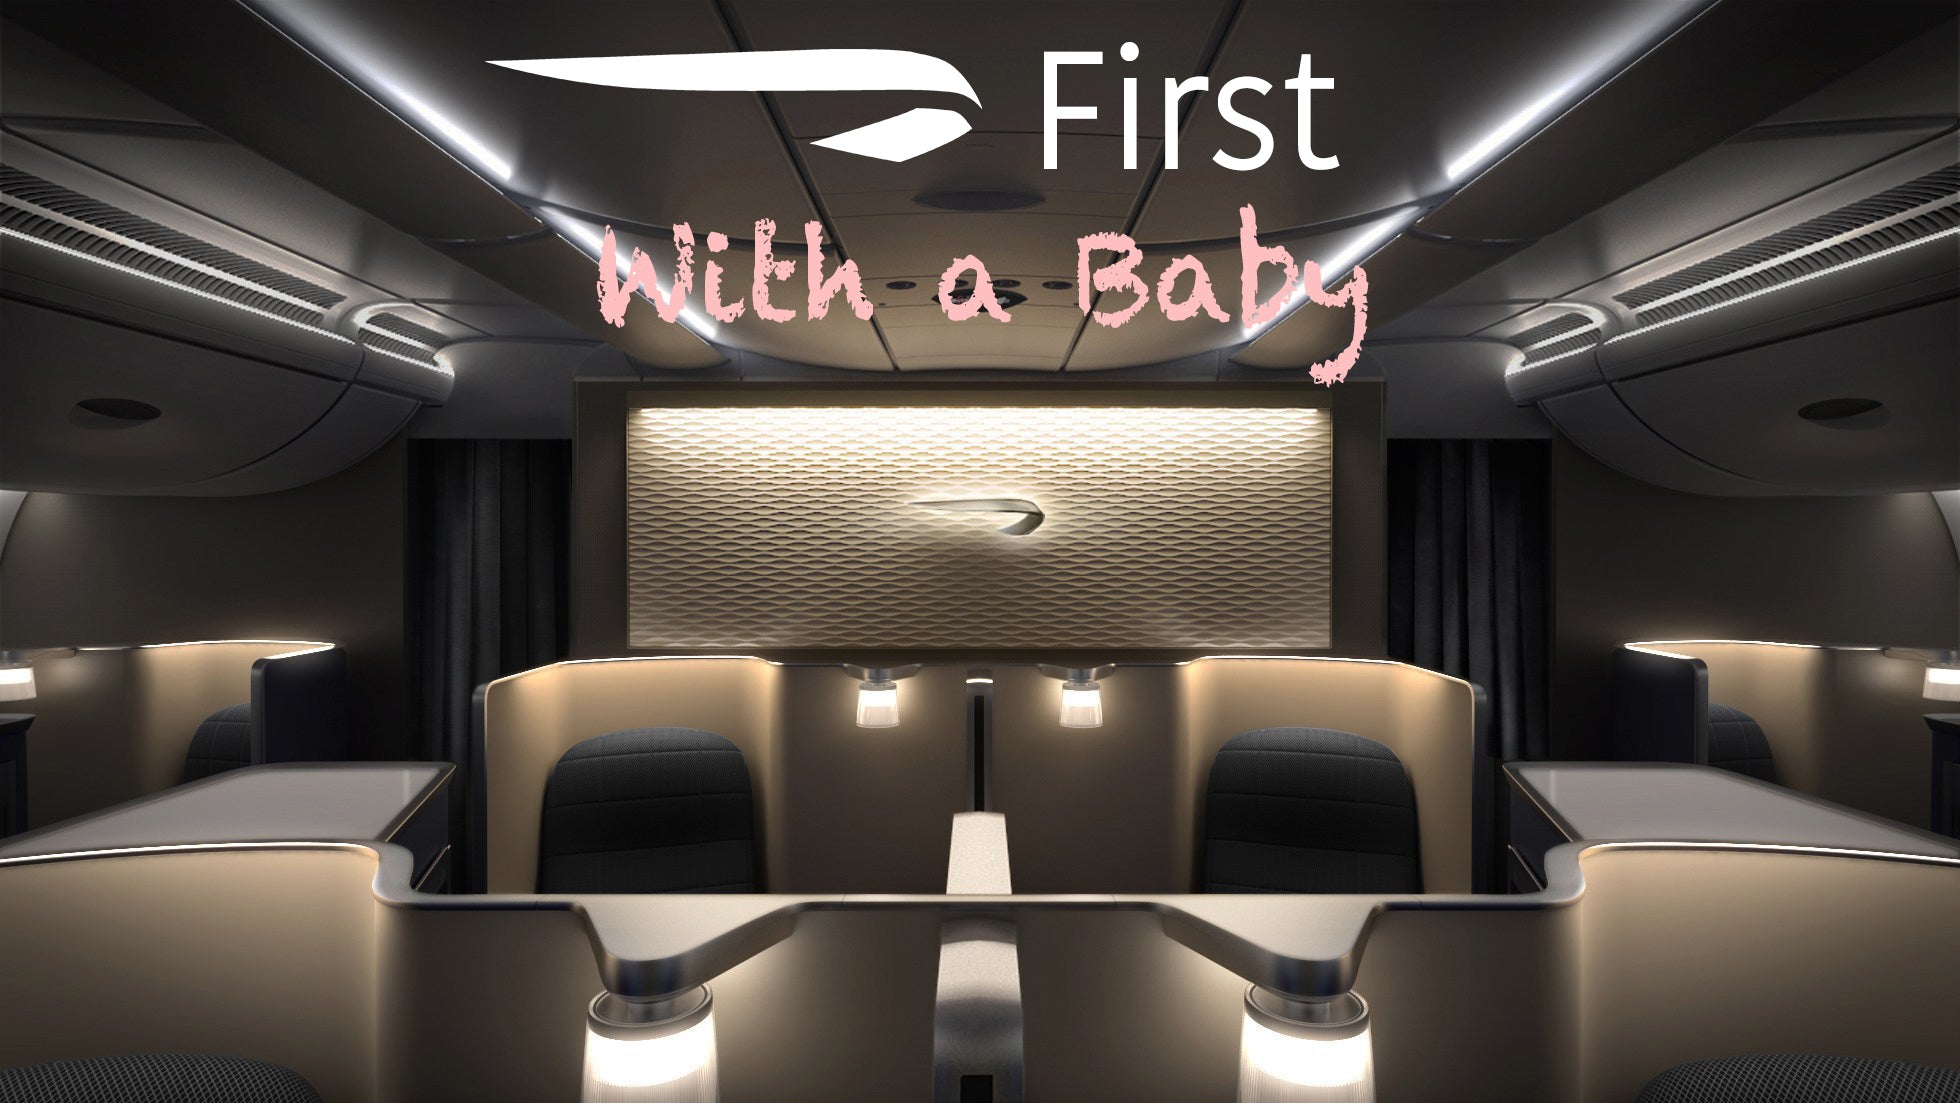 singapore airlines business class bassinet